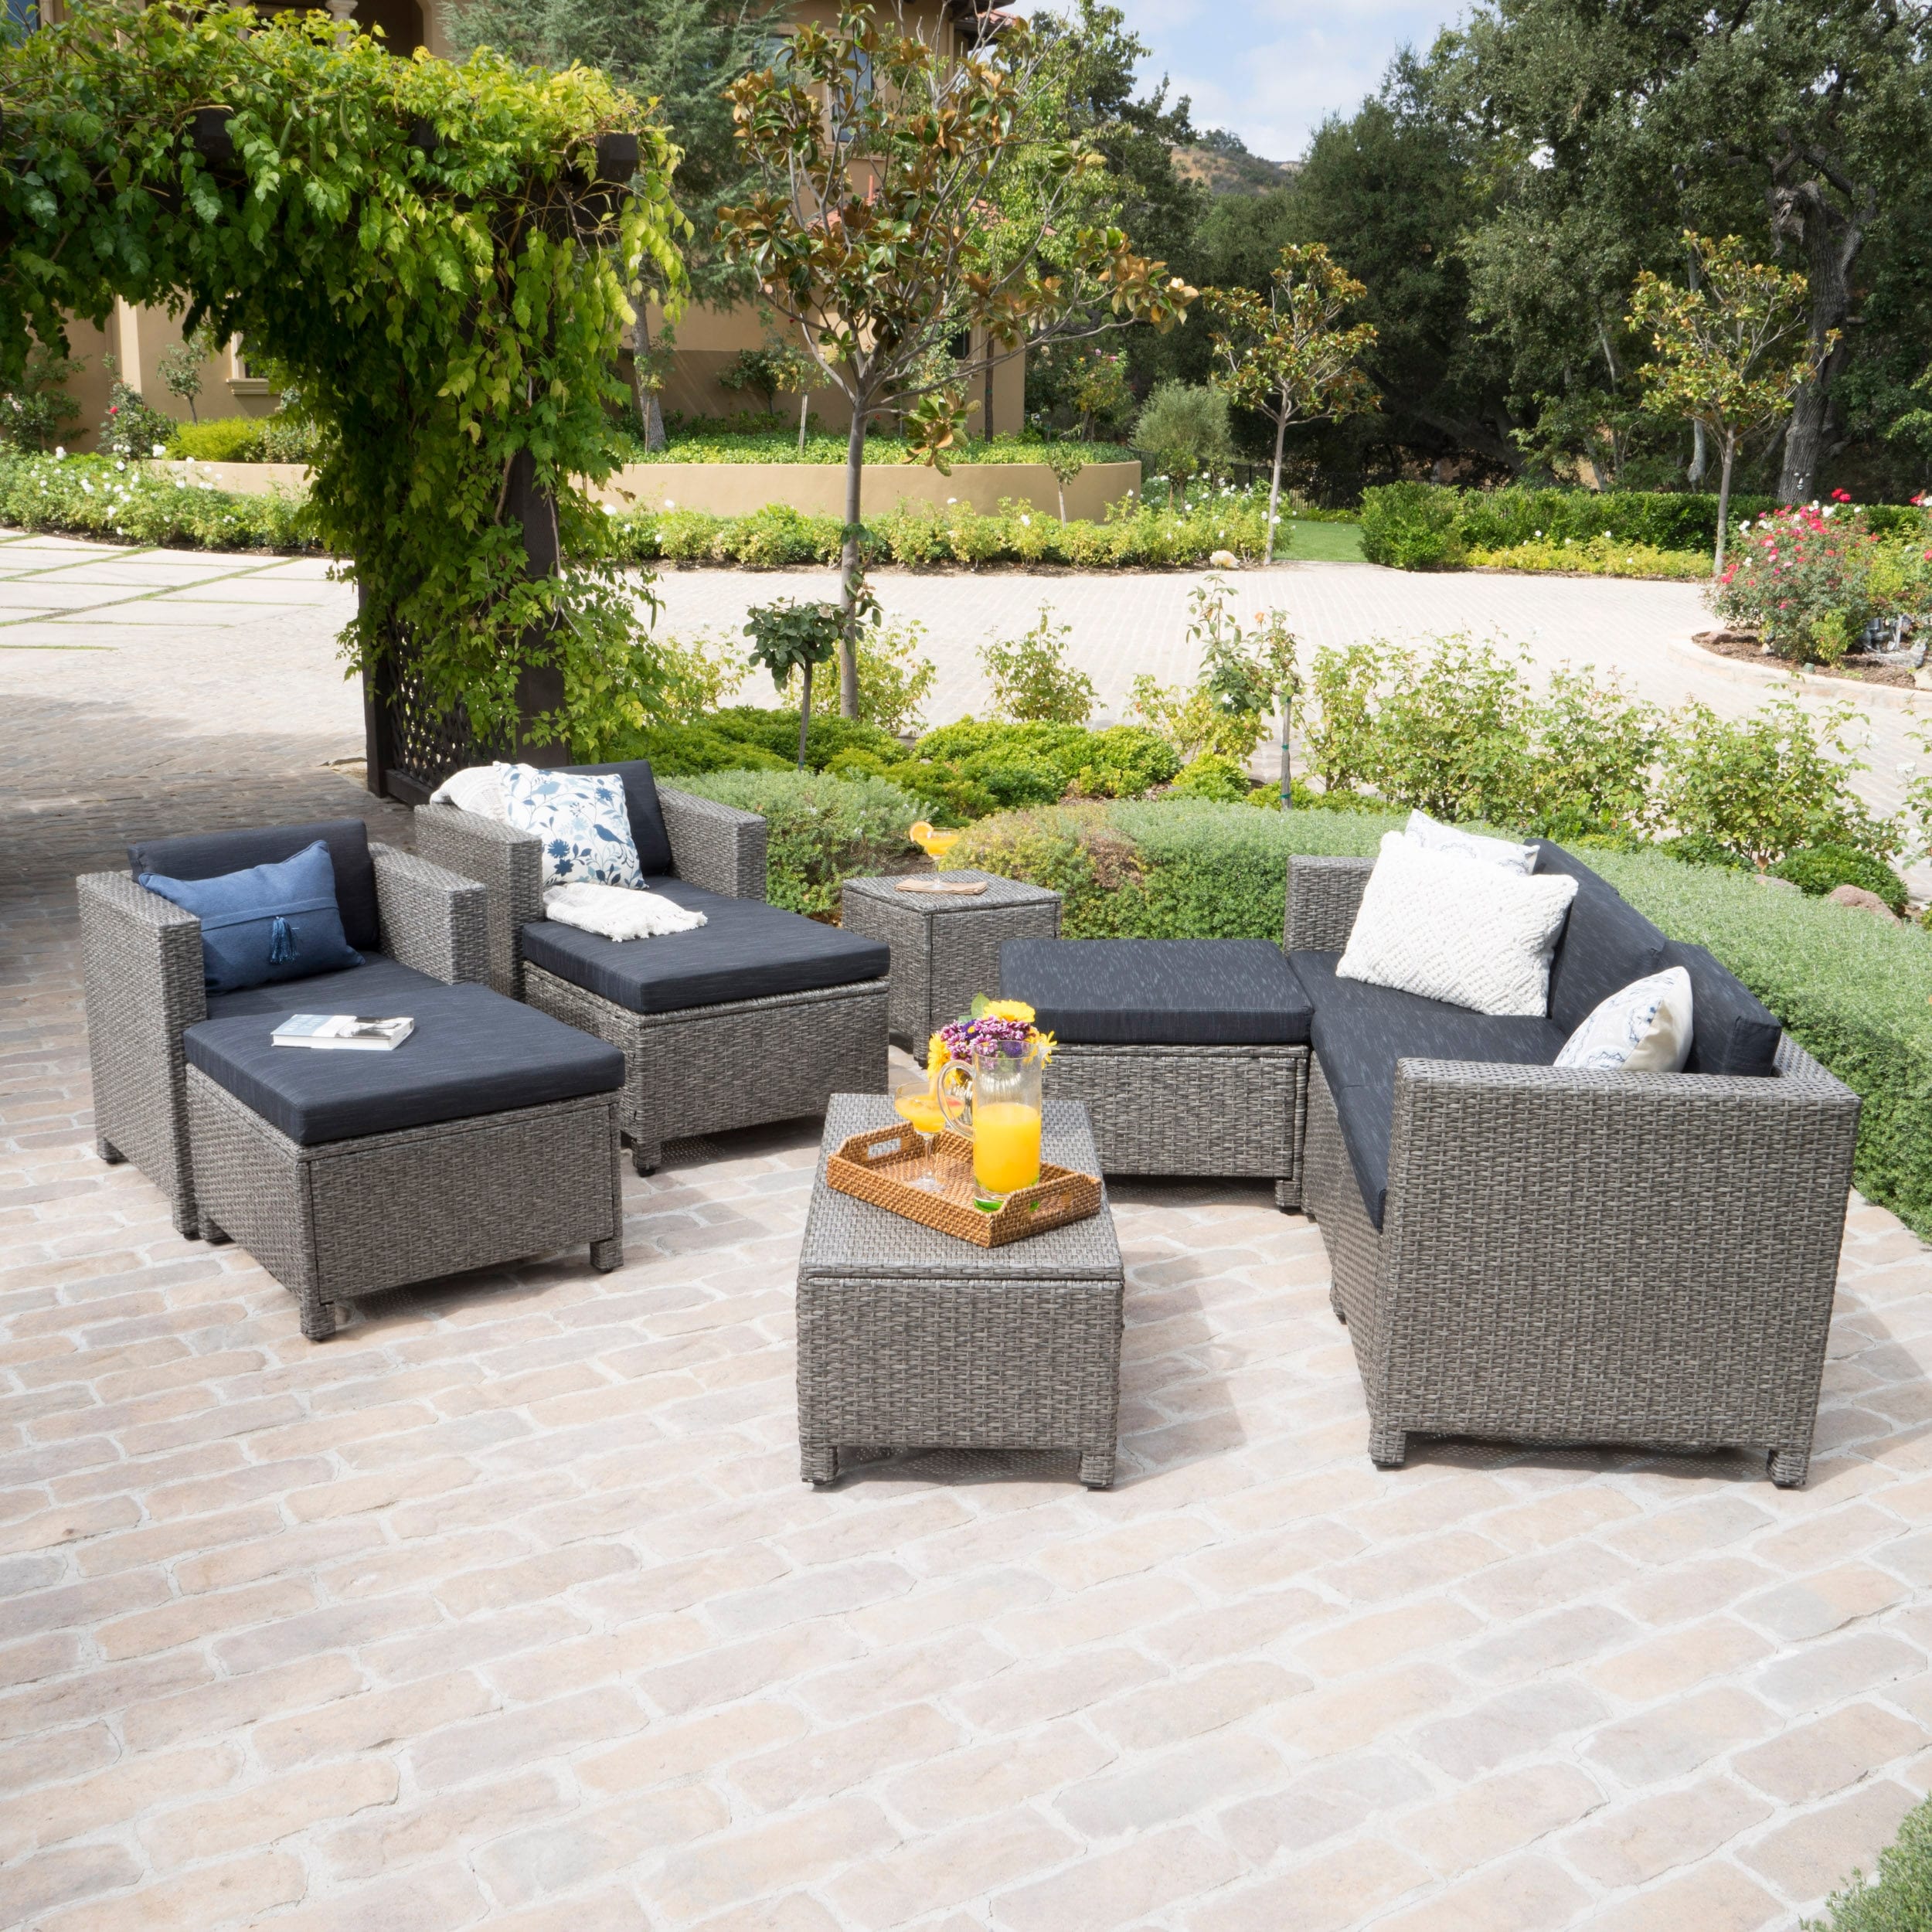 Puerta Outdoor 10-piece Wicker Sofa Set Collection With Cushions By Christopher Knight Home